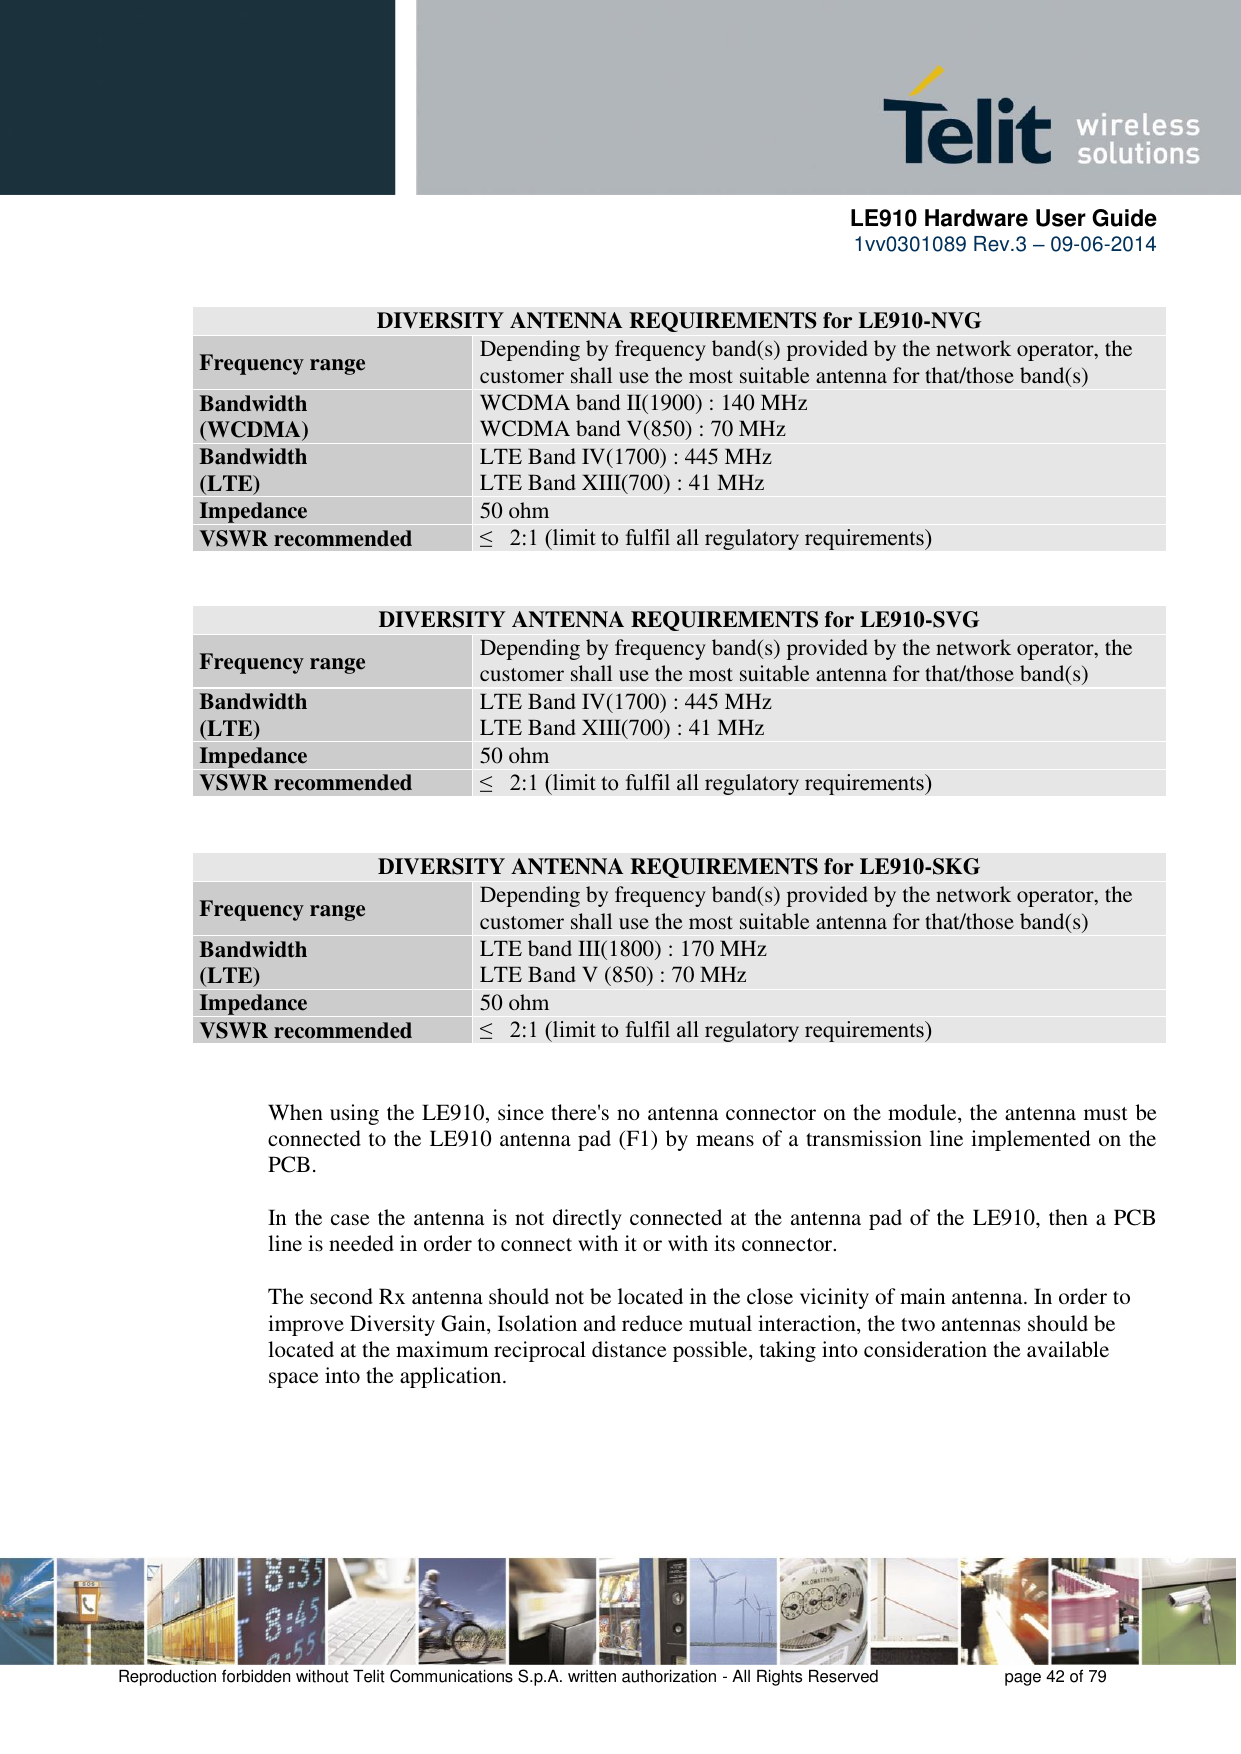      LE910 Hardware User Guide 1vv0301089 Rev.3 – 09-06-2014    Reproduction forbidden without Telit Communications S.p.A. written authorization - All Rights Reserved    page 42 of 79   DIVERSITY ANTENNA REQUIREMENTS for LE910-NVG Frequency range Depending by frequency band(s) provided by the network operator, the customer shall use the most suitable antenna for that/those band(s) Bandwidth  (WCDMA) WCDMA band II(1900) : 140 MHz  WCDMA band V(850) : 70 MHz  Bandwidth  (LTE) LTE Band IV(1700) : 445 MHz  LTE Band XIII(700) : 41 MHz  Impedance 50 ohm VSWR recommended ≤   2:1 (limit to fulfil all regulatory requirements)   DIVERSITY ANTENNA REQUIREMENTS for LE910-SVG Frequency range Depending by frequency band(s) provided by the network operator, the customer shall use the most suitable antenna for that/those band(s) Bandwidth  (LTE) LTE Band IV(1700) : 445 MHz  LTE Band XIII(700) : 41 MHz  Impedance 50 ohm VSWR recommended ≤   2:1 (limit to fulfil all regulatory requirements)  DIVERSITY ANTENNA REQUIREMENTS for LE910-SKG Frequency range Depending by frequency band(s) provided by the network operator, the customer shall use the most suitable antenna for that/those band(s) Bandwidth  (LTE) LTE band III(1800) : 170 MHz  LTE Band V (850) : 70 MHz  Impedance 50 ohm VSWR recommended ≤   2:1 (limit to fulfil all regulatory requirements)  When using the LE910, since there&apos;s no antenna connector on the module, the antenna must be connected to the LE910 antenna pad (F1) by means of a transmission line implemented on the PCB.  In the case the antenna is not directly connected at the antenna pad of the LE910, then a PCB line is needed in order to connect with it or with its connector.   The second Rx antenna should not be located in the close vicinity of main antenna. In order to improve Diversity Gain, Isolation and reduce mutual interaction, the two antennas should be located at the maximum reciprocal distance possible, taking into consideration the available space into the application.  